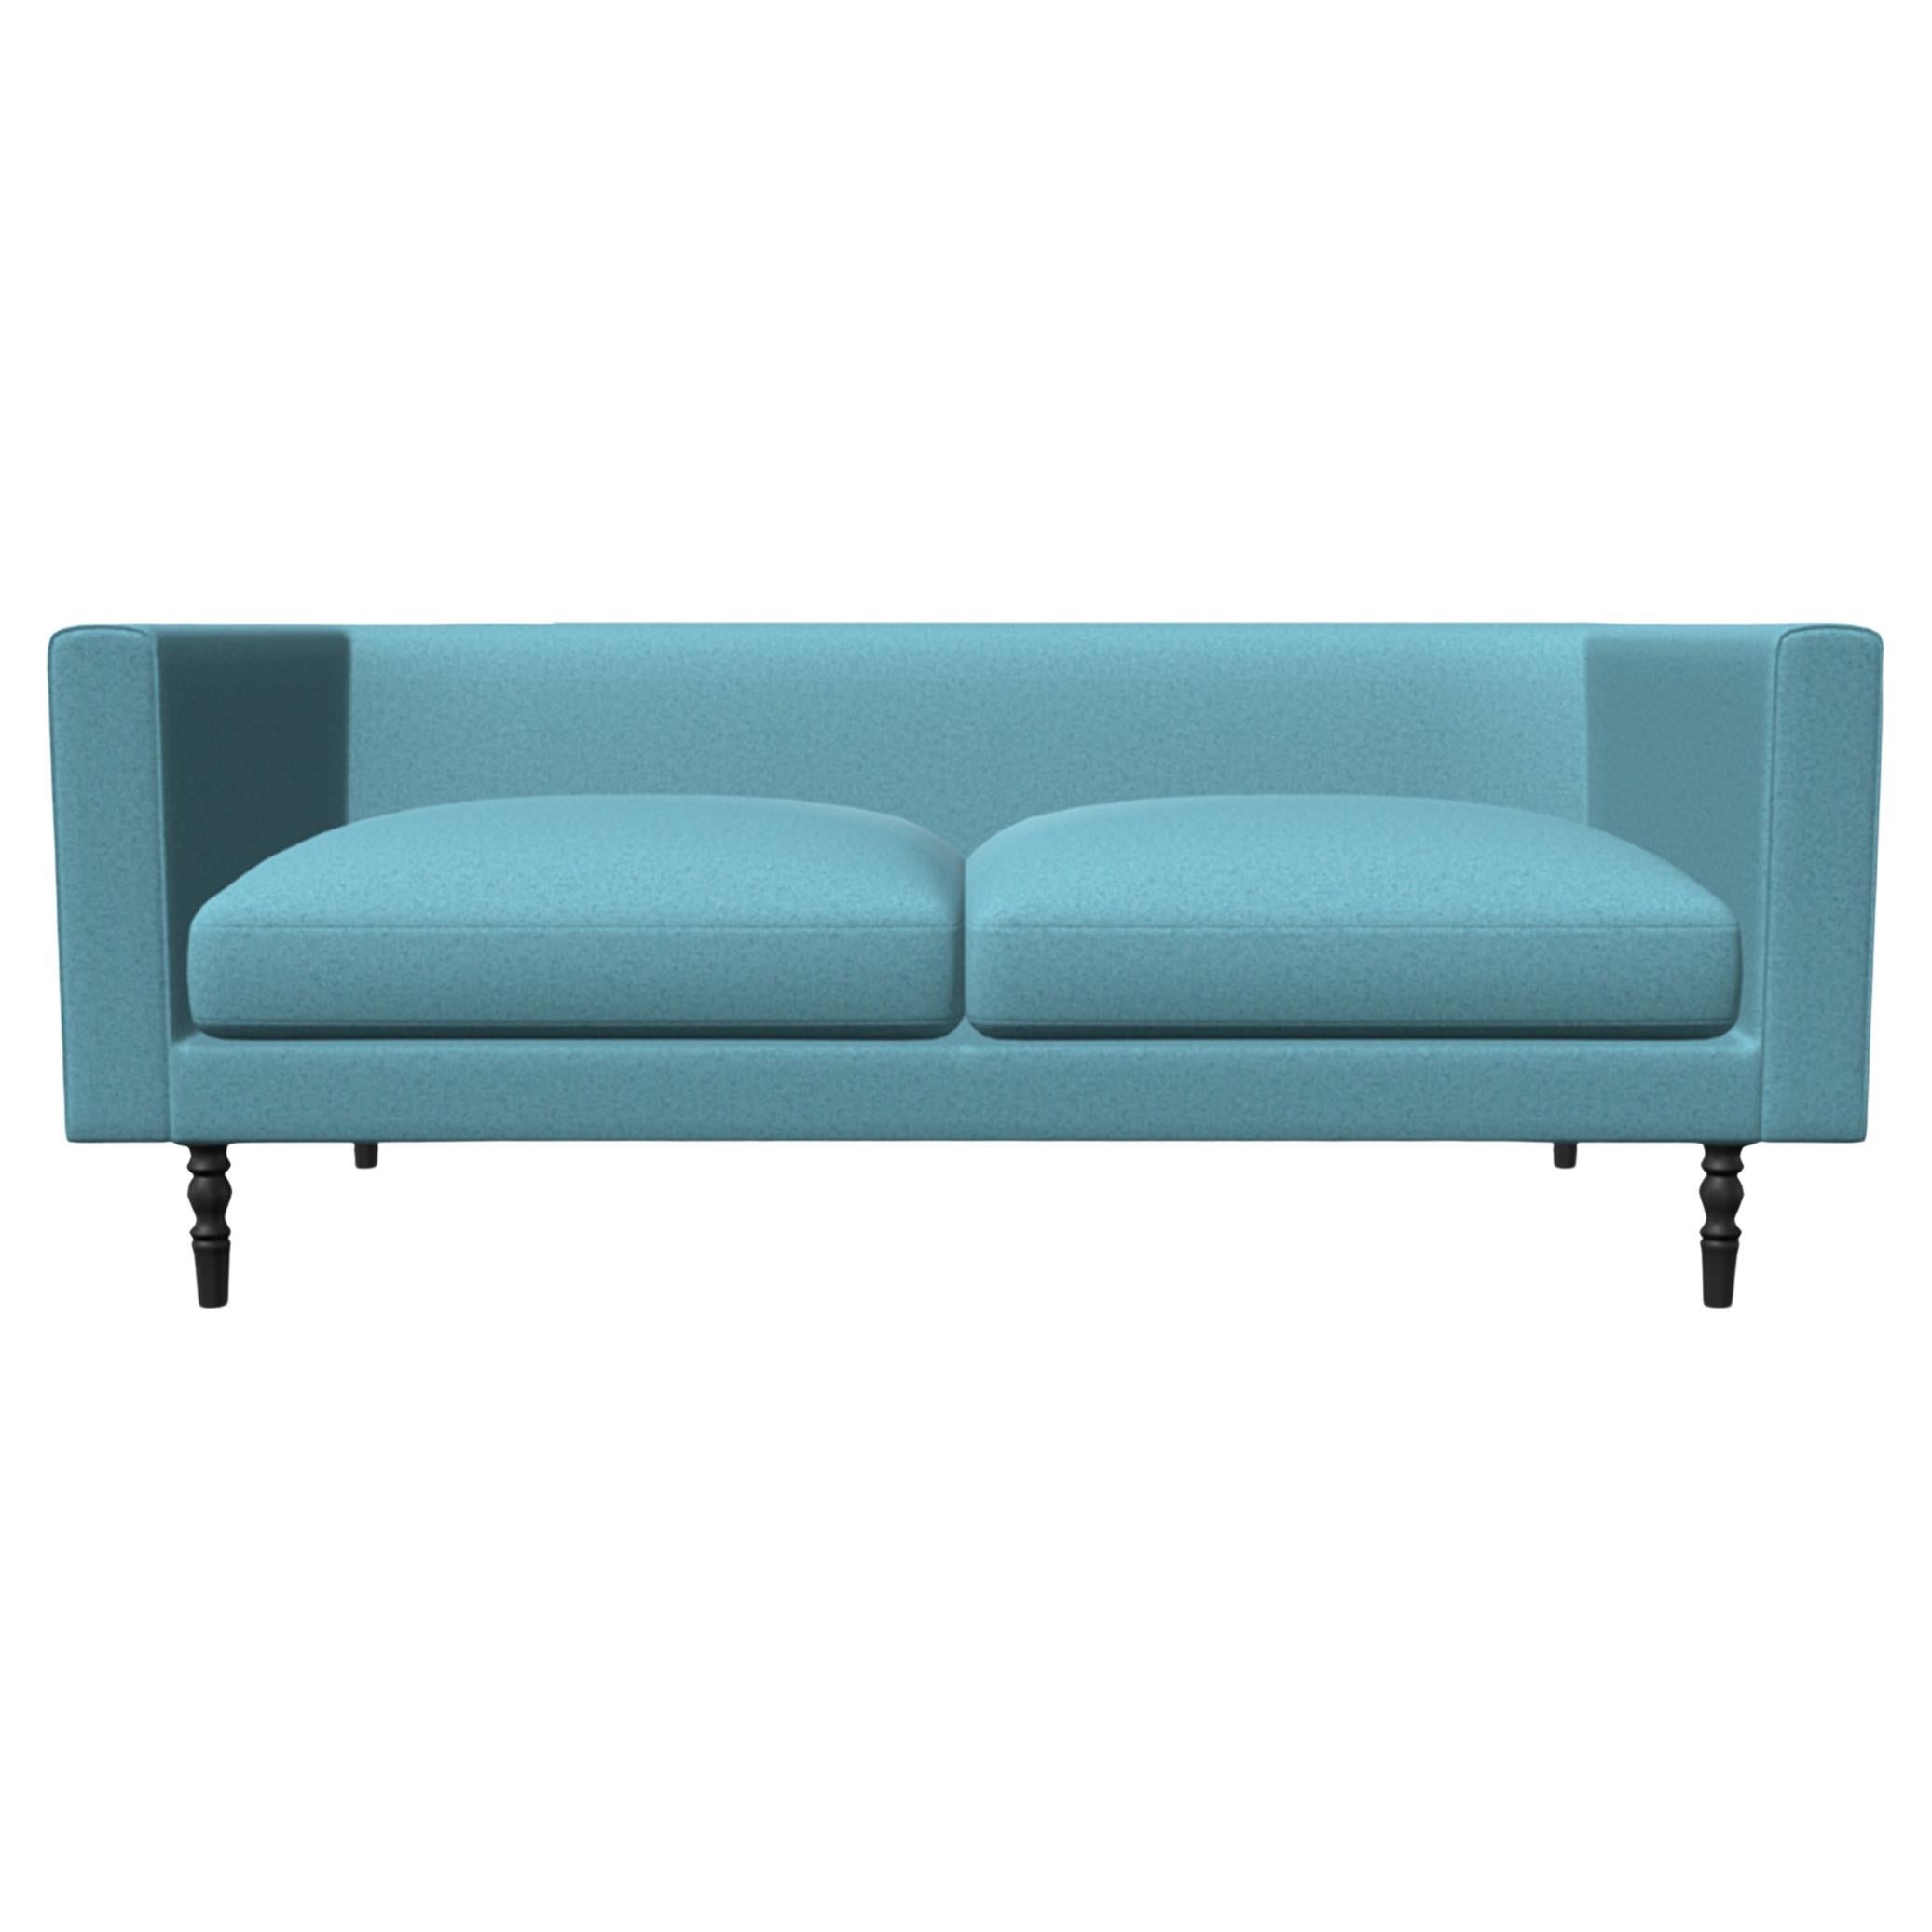 Moooi Boutique 2-Seat Sofa in Divina 3, 836 Upholstery with Pawn Legs